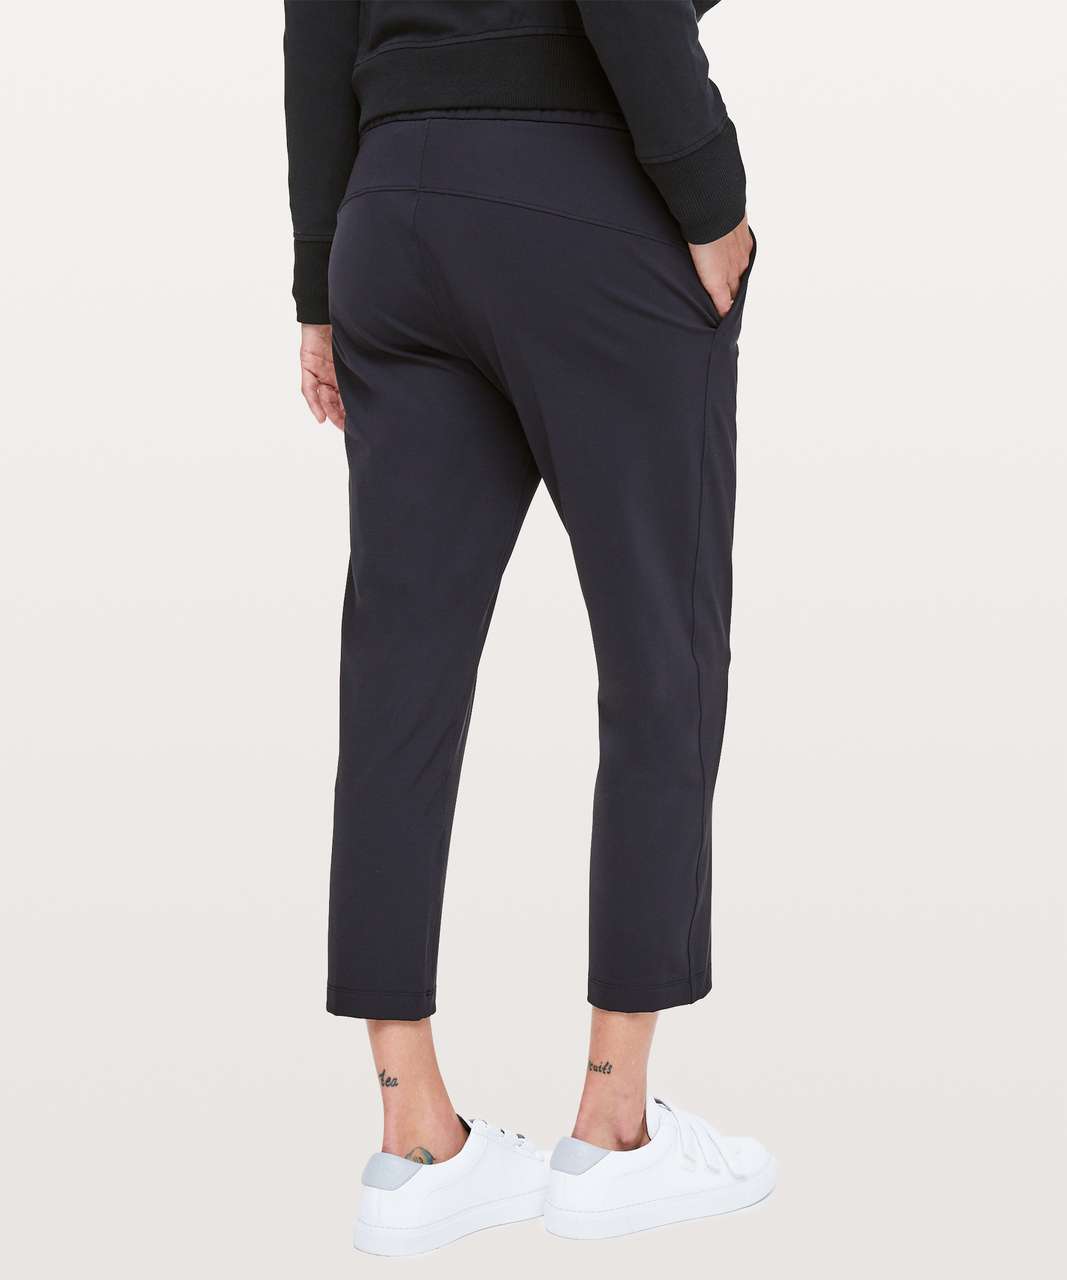 Lululemon On The Fly Crop *23" - Black (First Release)